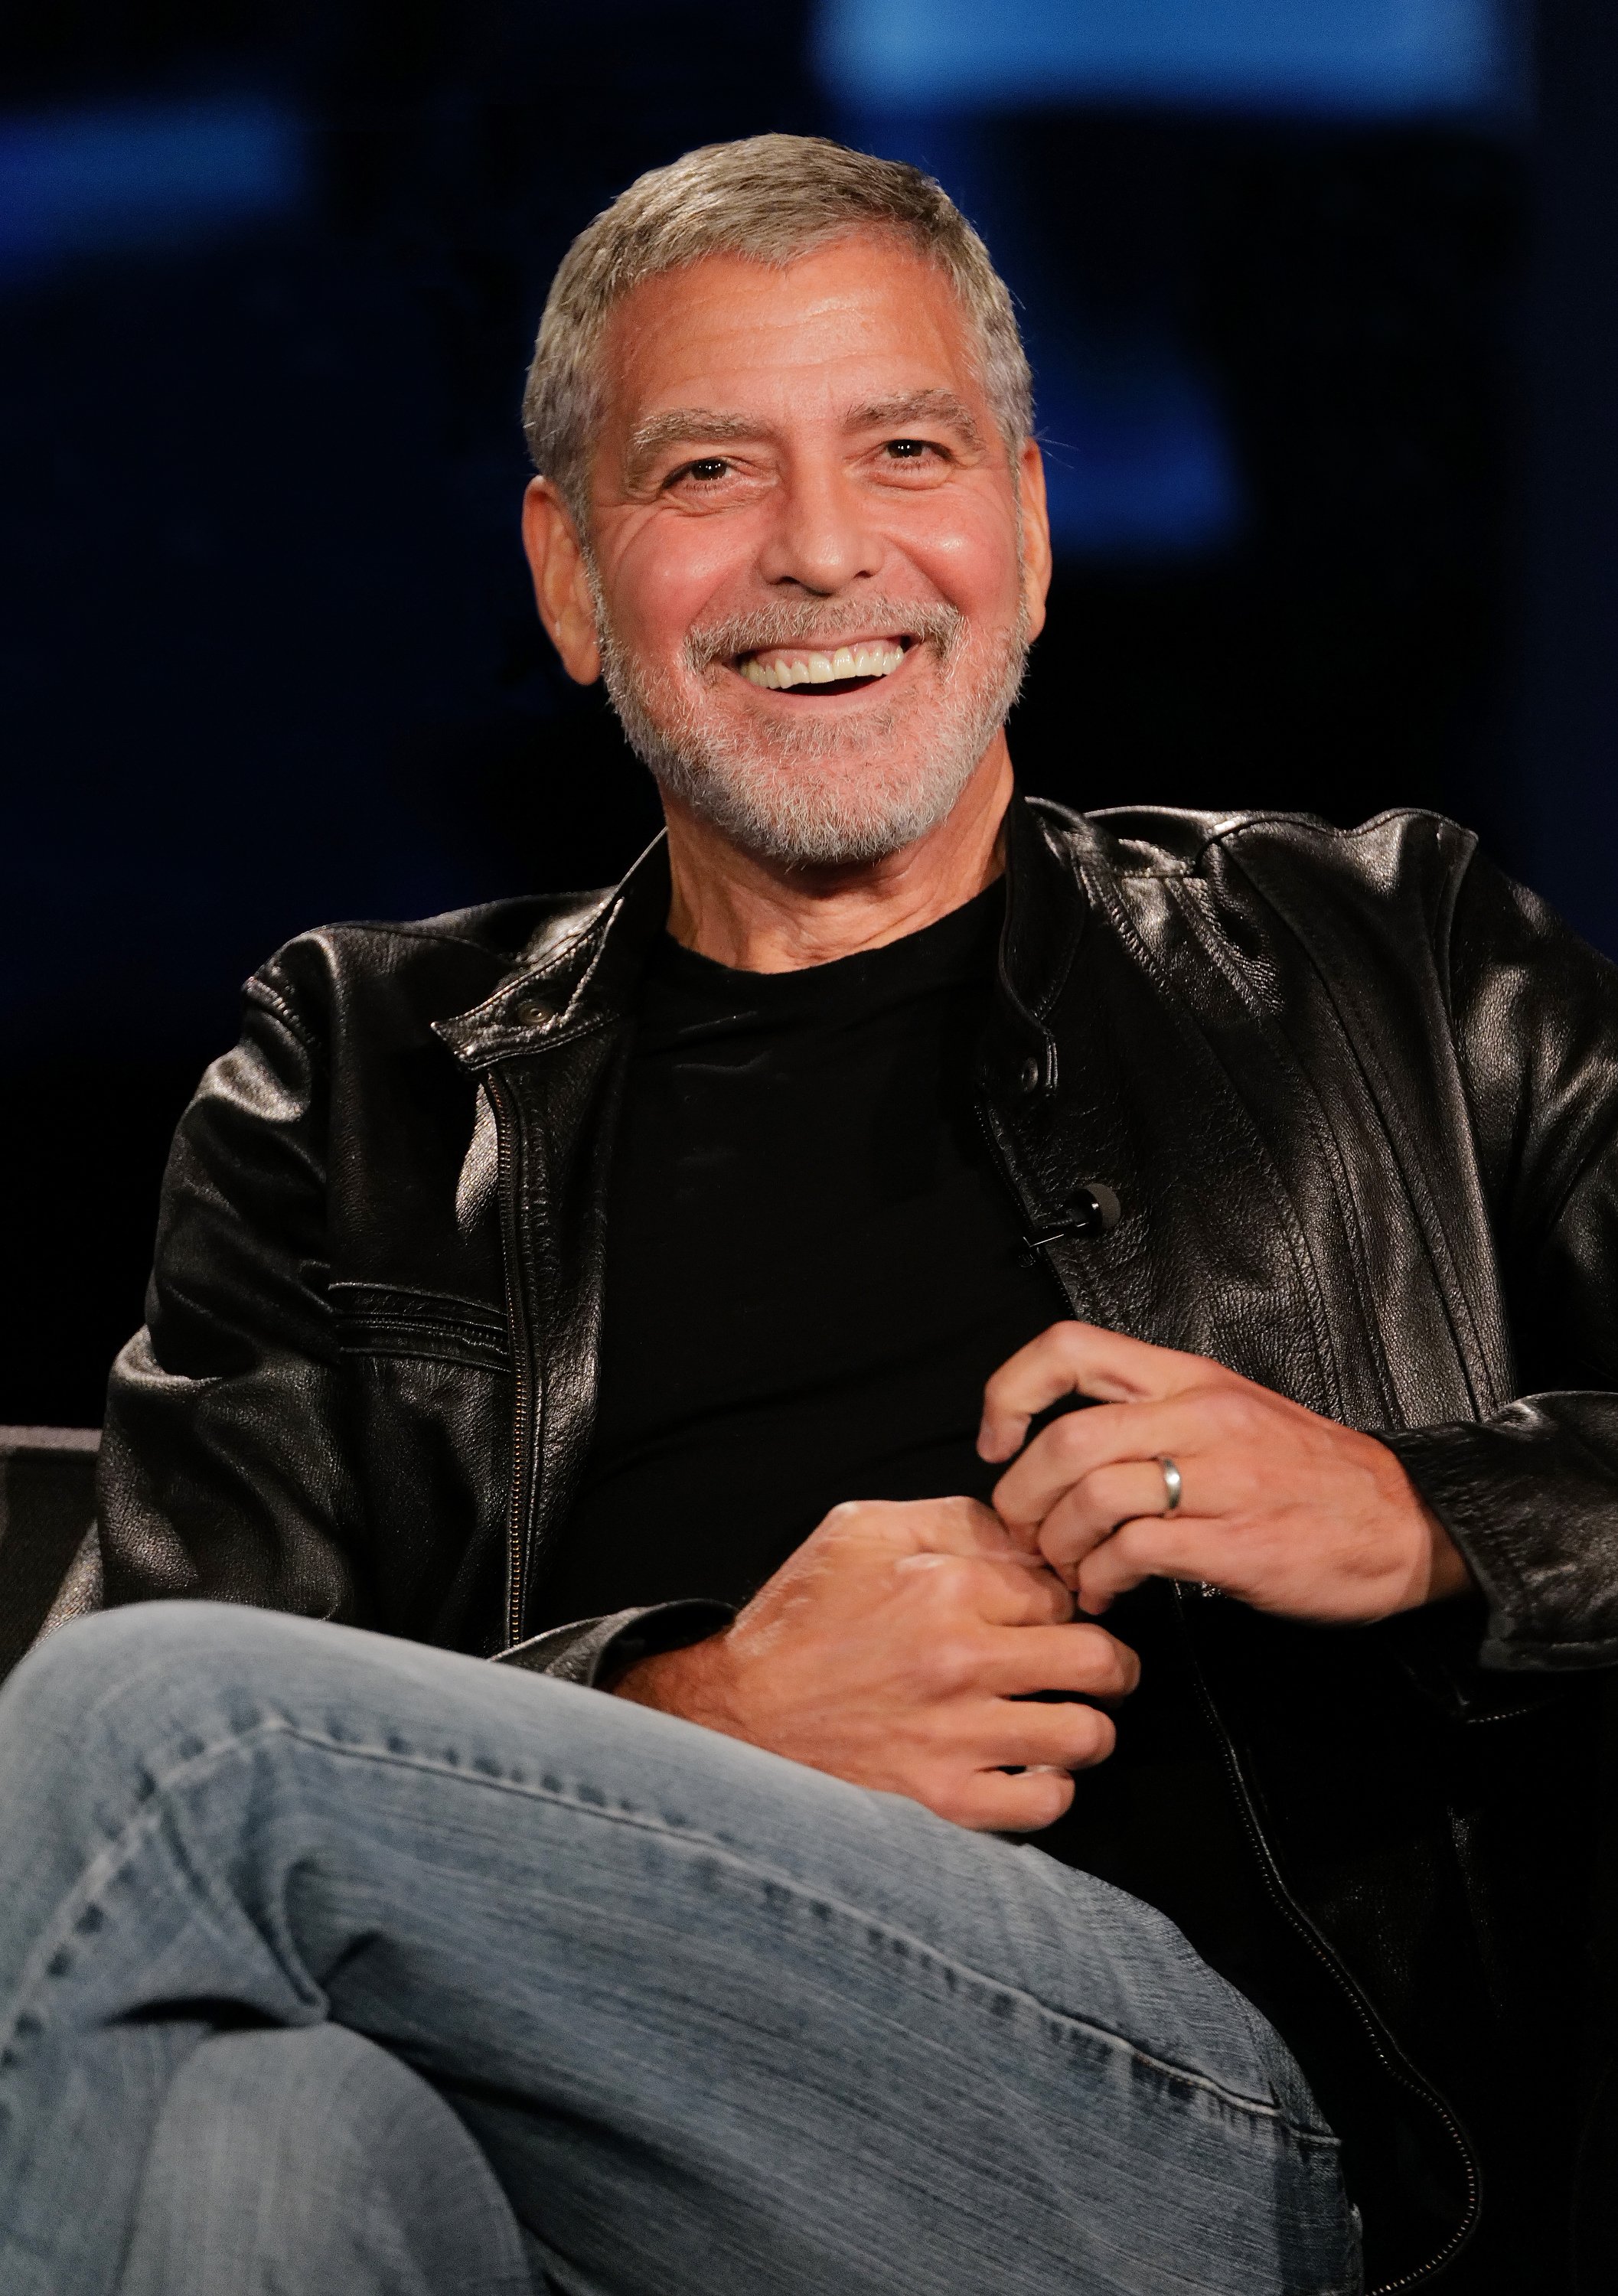 George Clooney during an appearance on ABC's "Jimmy Kimmel Live!" Season 19. / Source: Getty Images